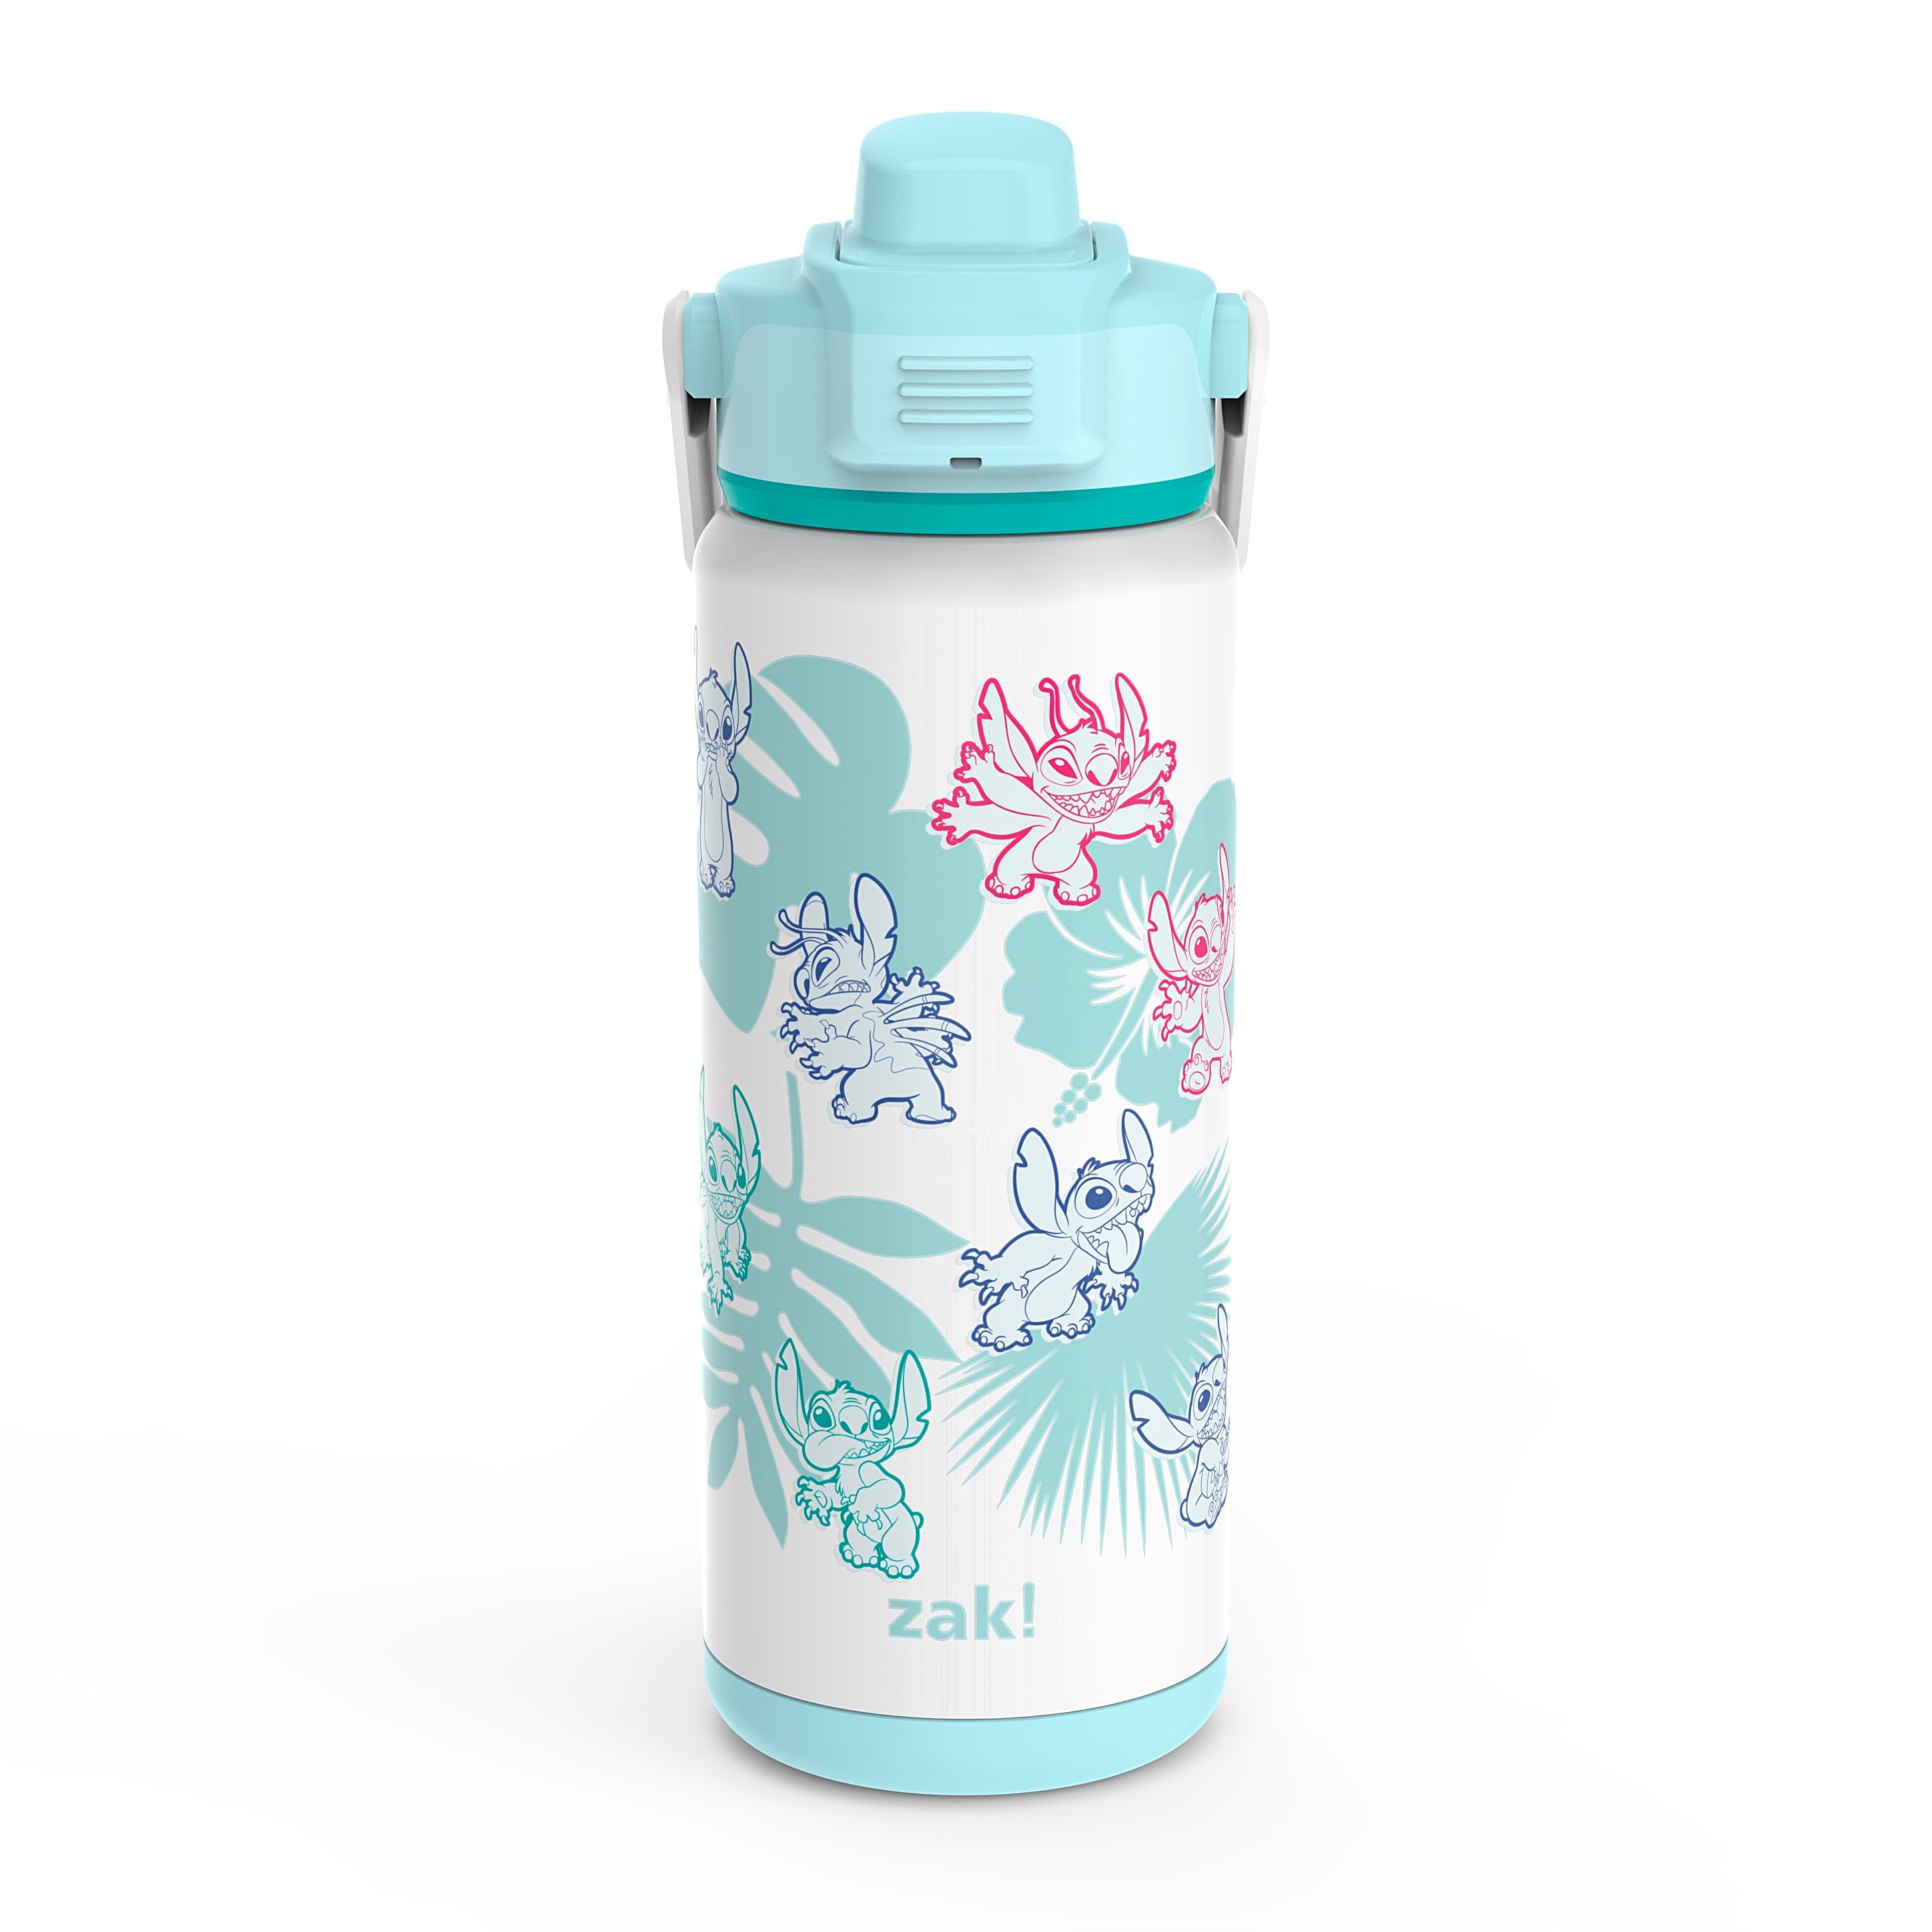 Kids Water Bottles for School: 7 Things To Look Out For